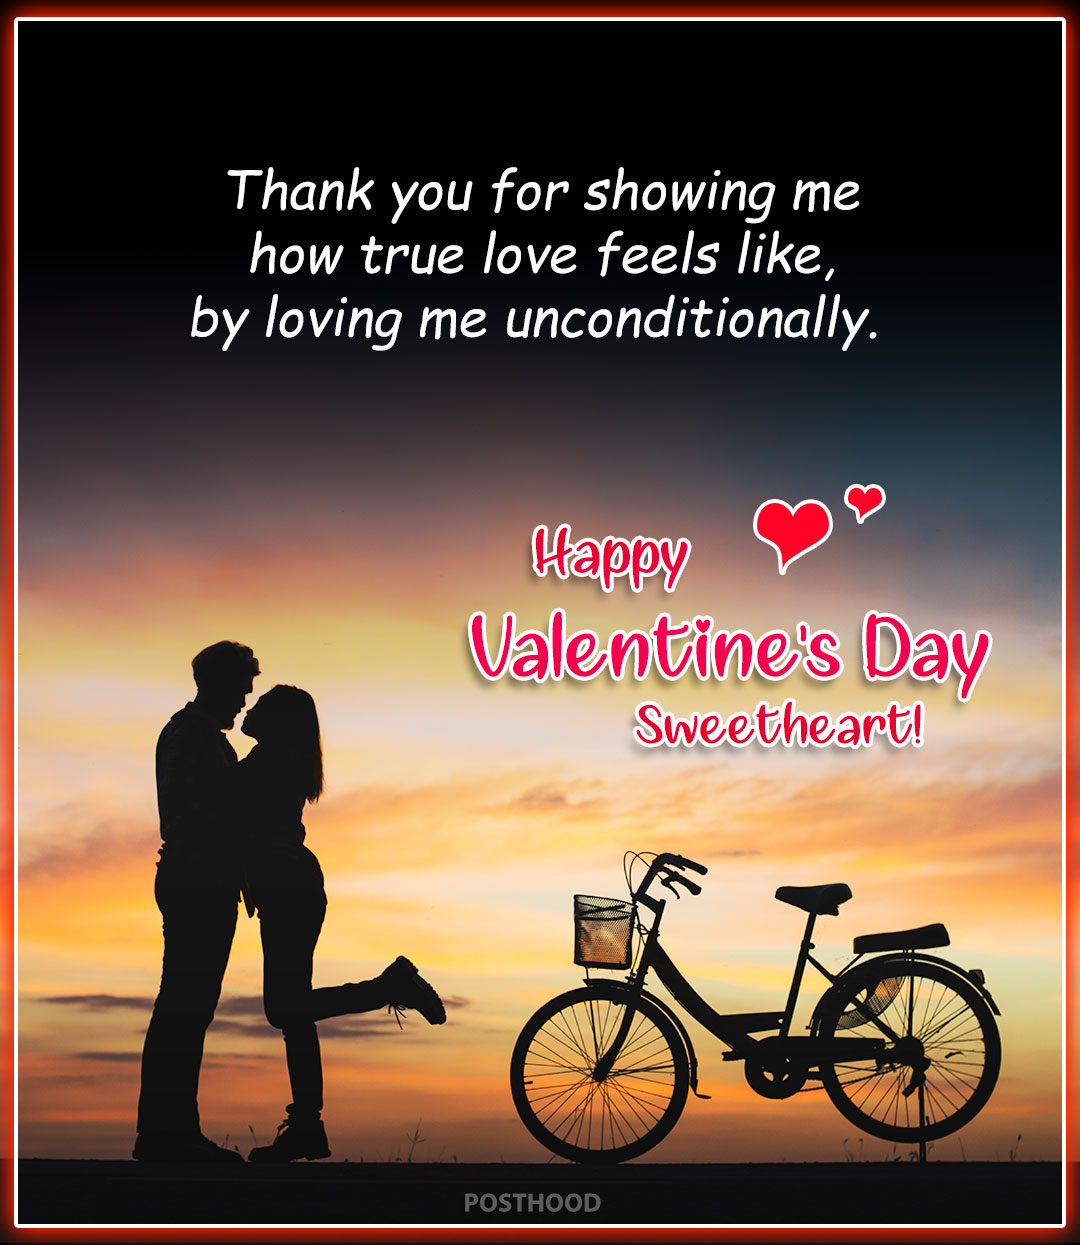 Sweet charming love message to wish her a happy valentine's day. These intense love messages will melt her heart and renew your love again.